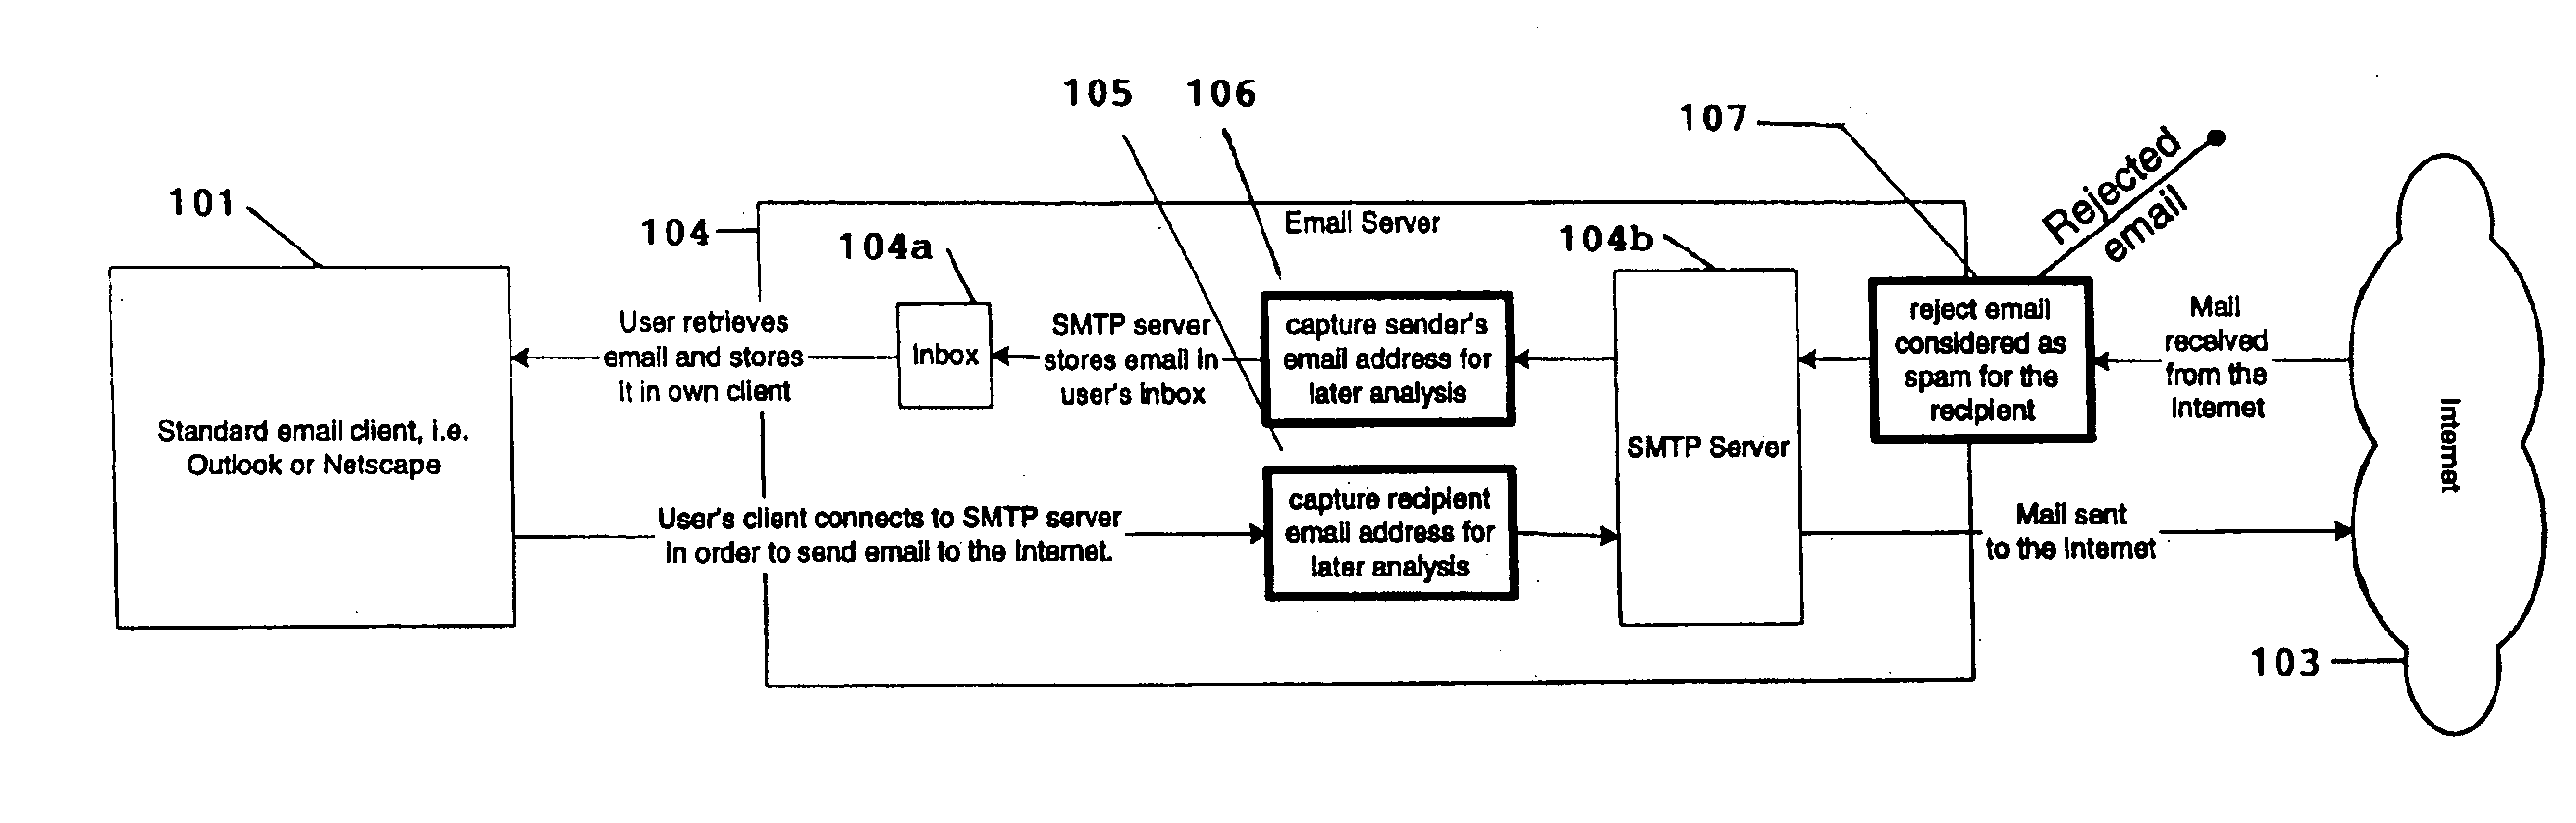 System for eliminating unauthorized electronic mail